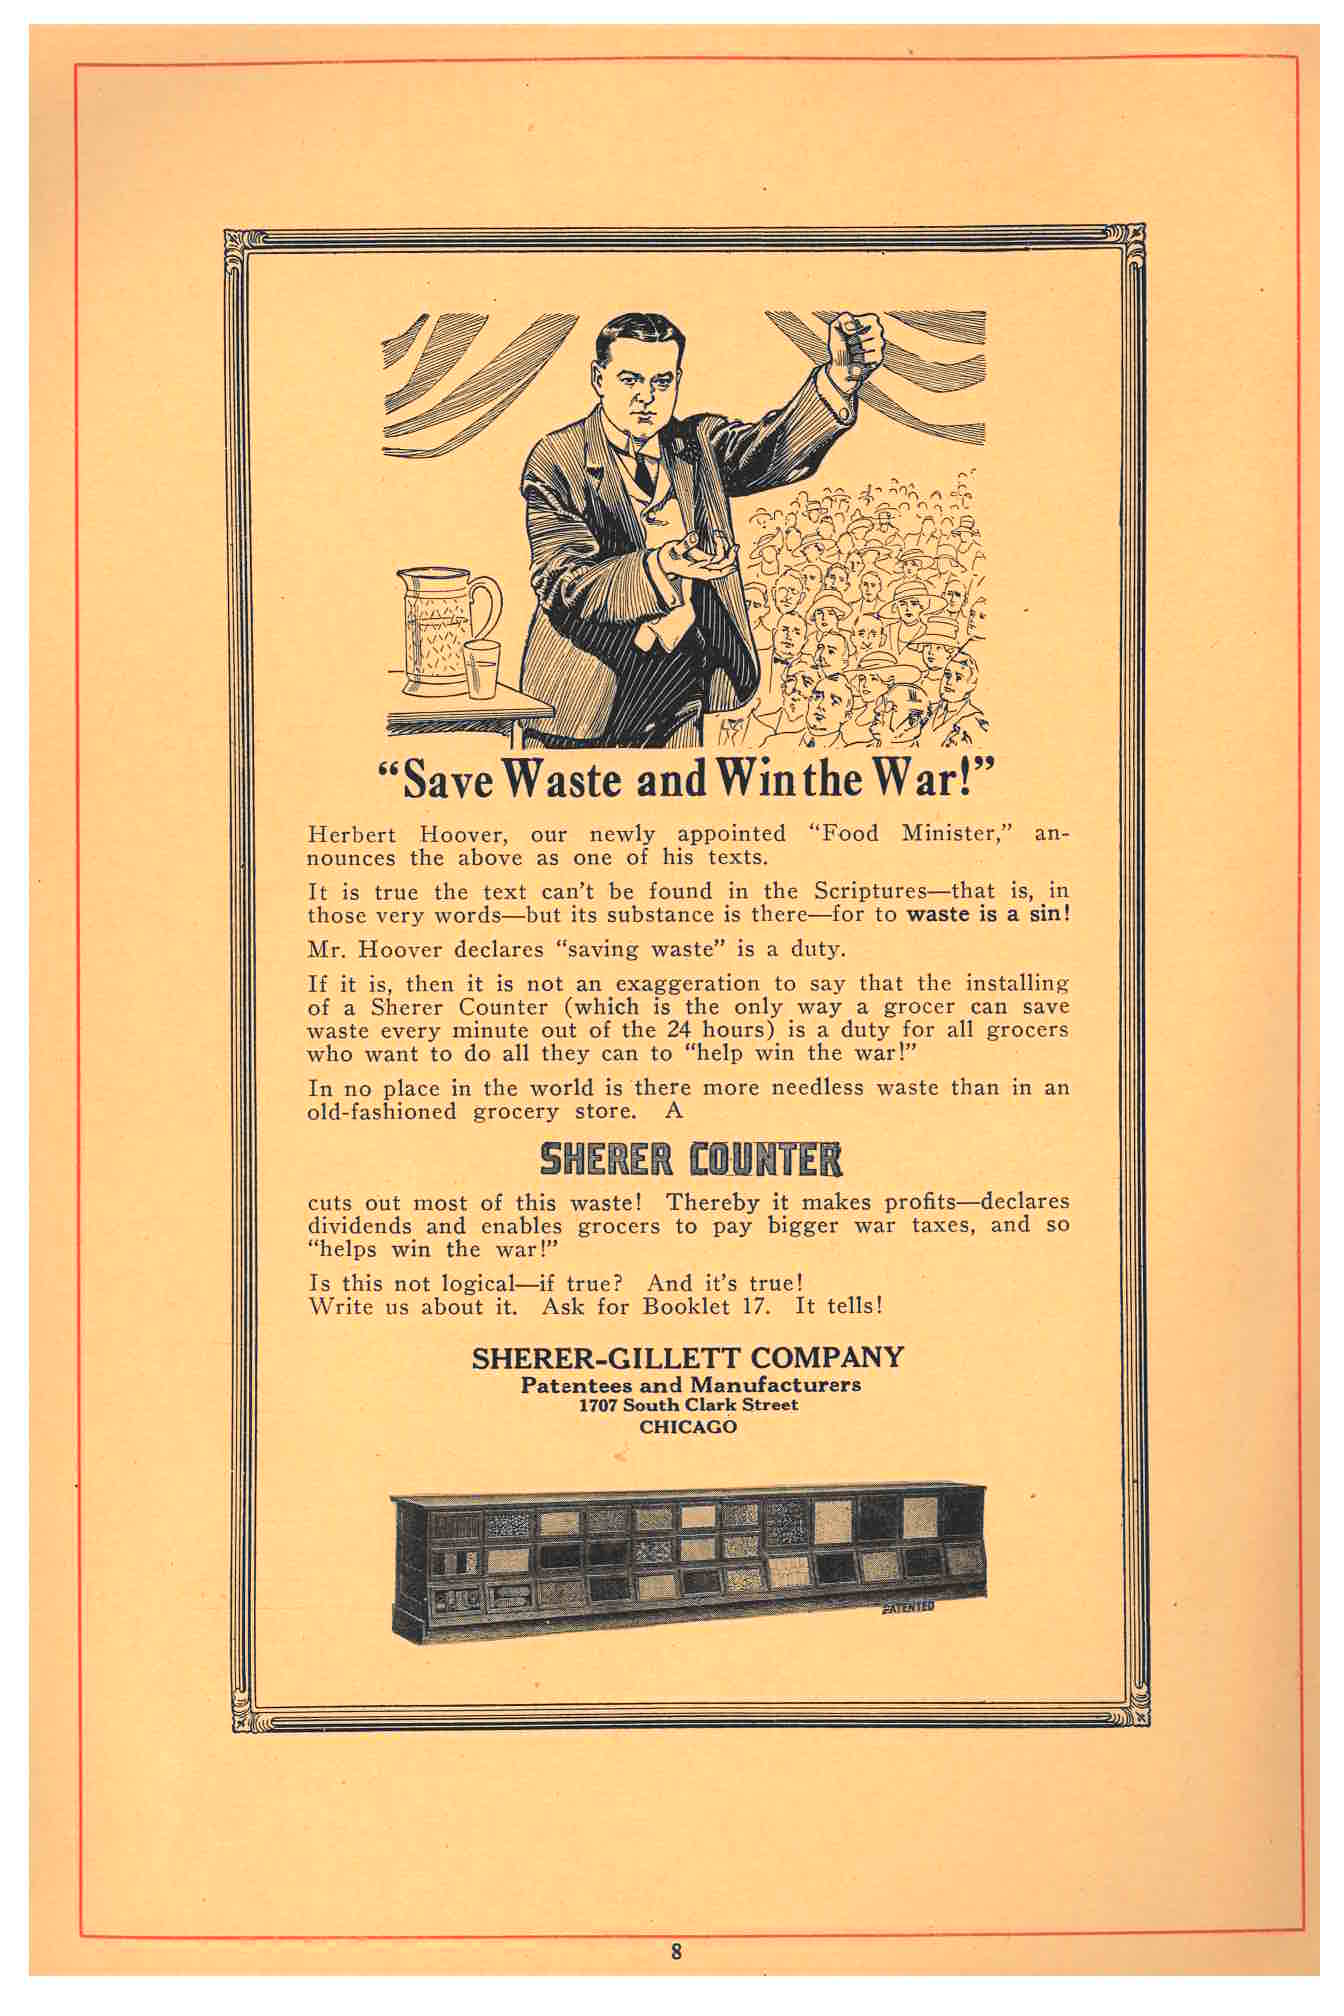 advertisement for Sherer Counter “Save Waste and Win the War!” with image of Sherer Counter